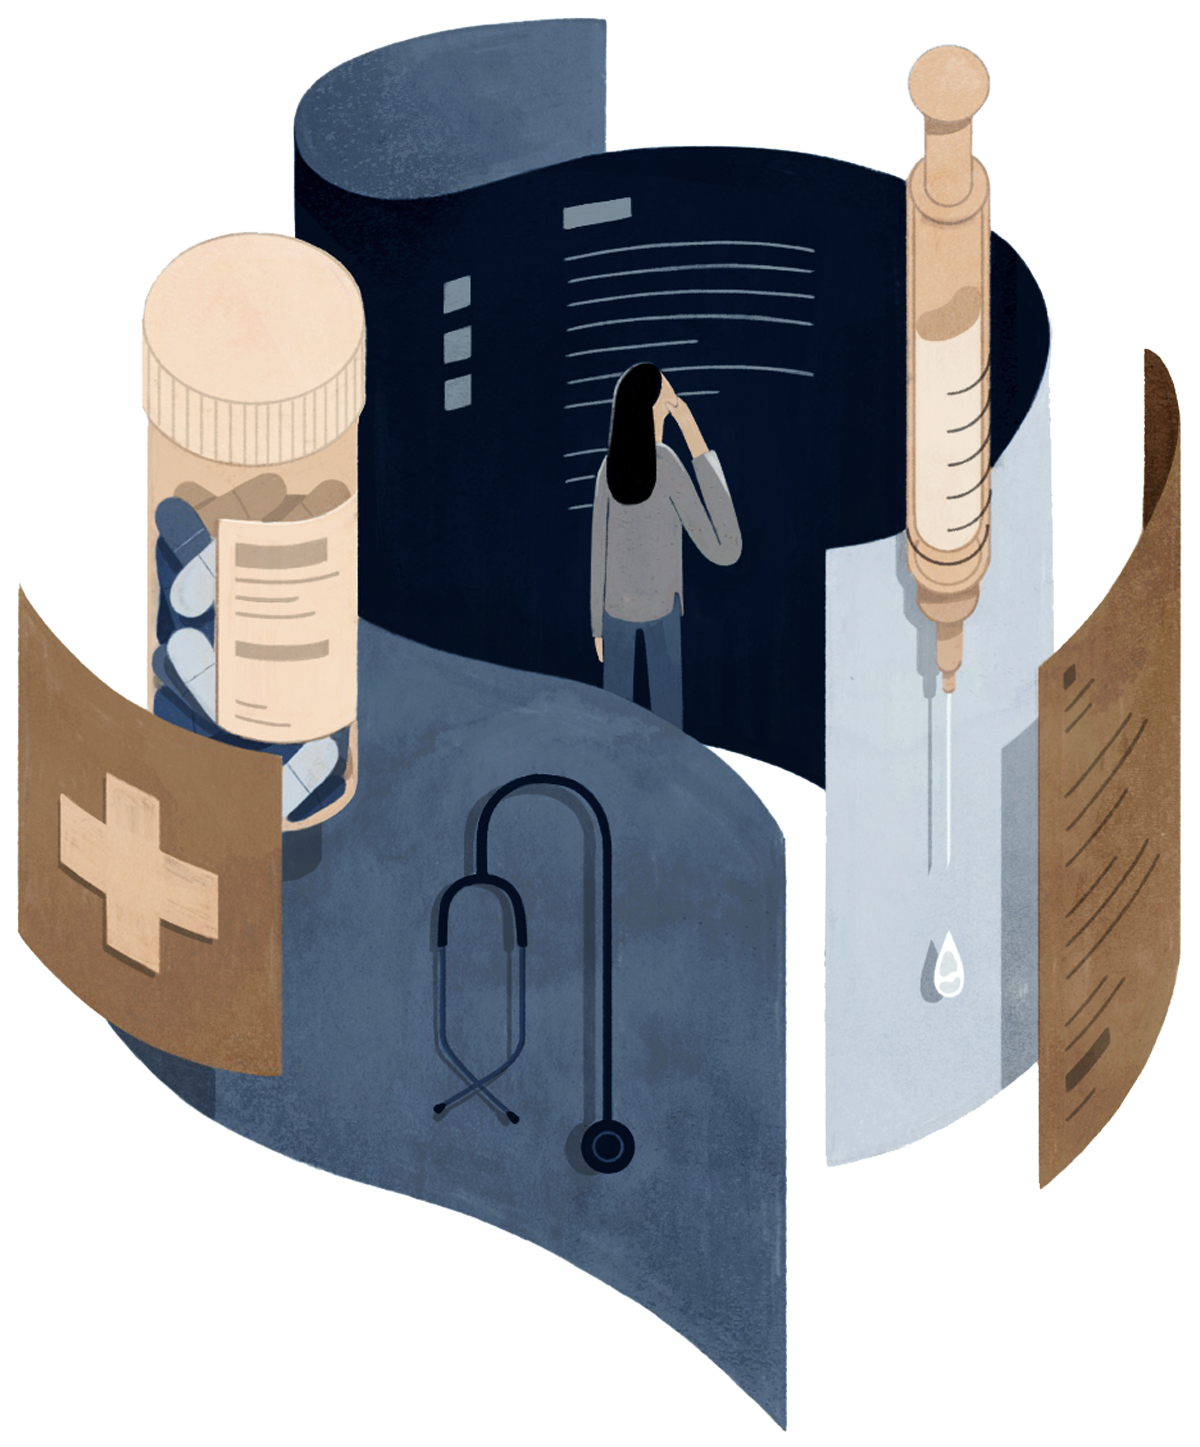 Illustration of a woman inside a swirl of confusing health care items